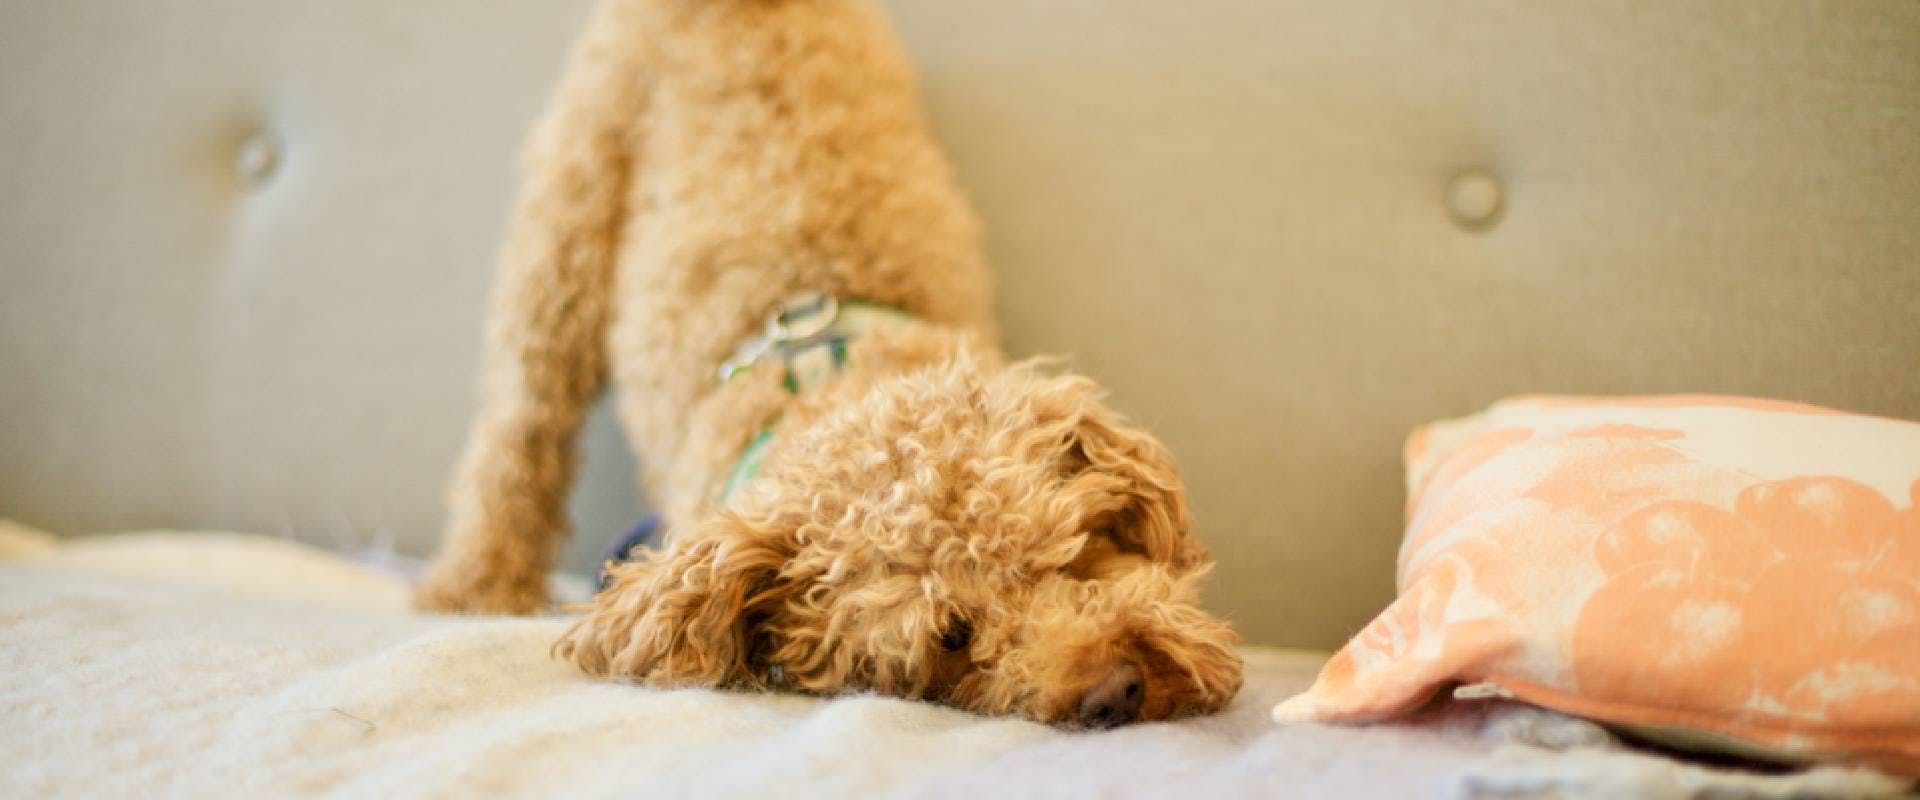 Toy Poodle in puppy posture